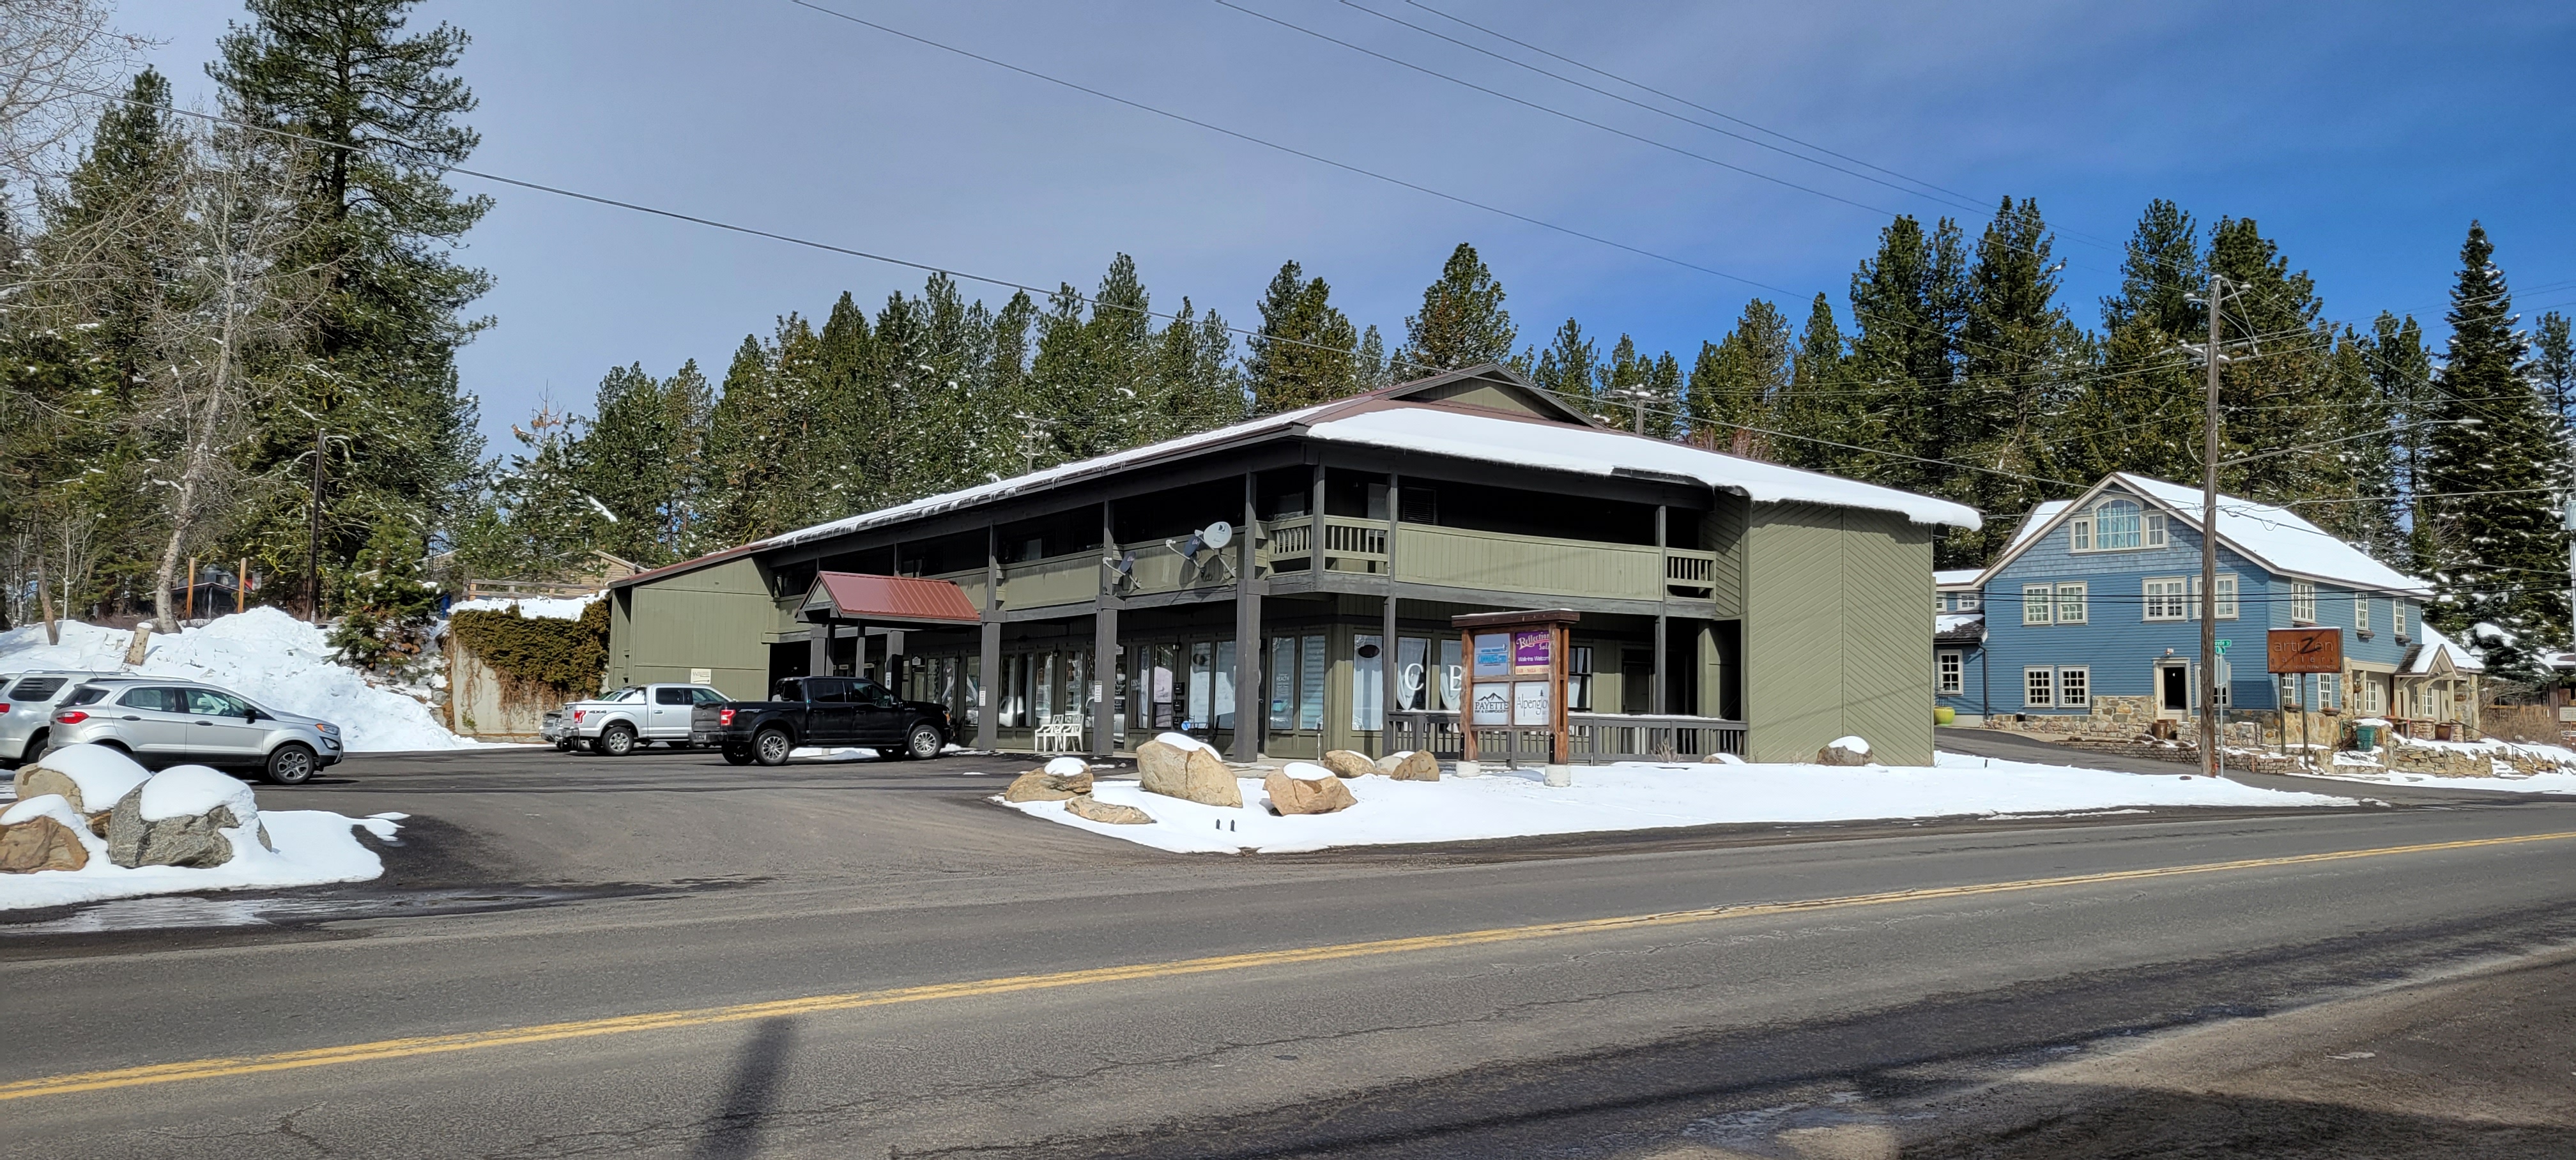 Green trees surround a green two-story building along a road in McCall, Idaho.